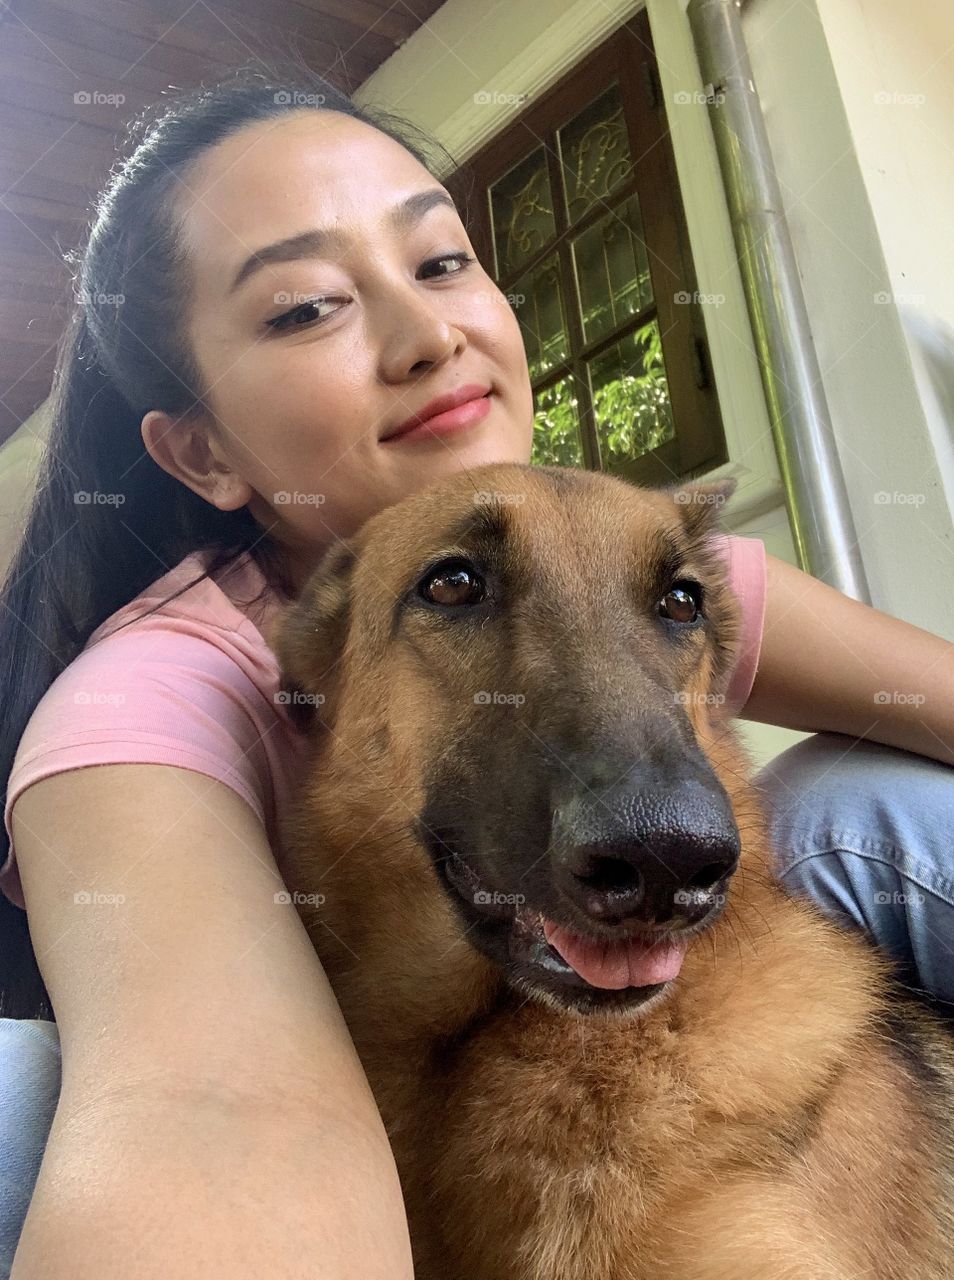 Selfie myself with my dearest dog calls Viola, German Shepherd dog who does not care the whole world but lovely and kind still, especially when she saw dog snacks in my hand.